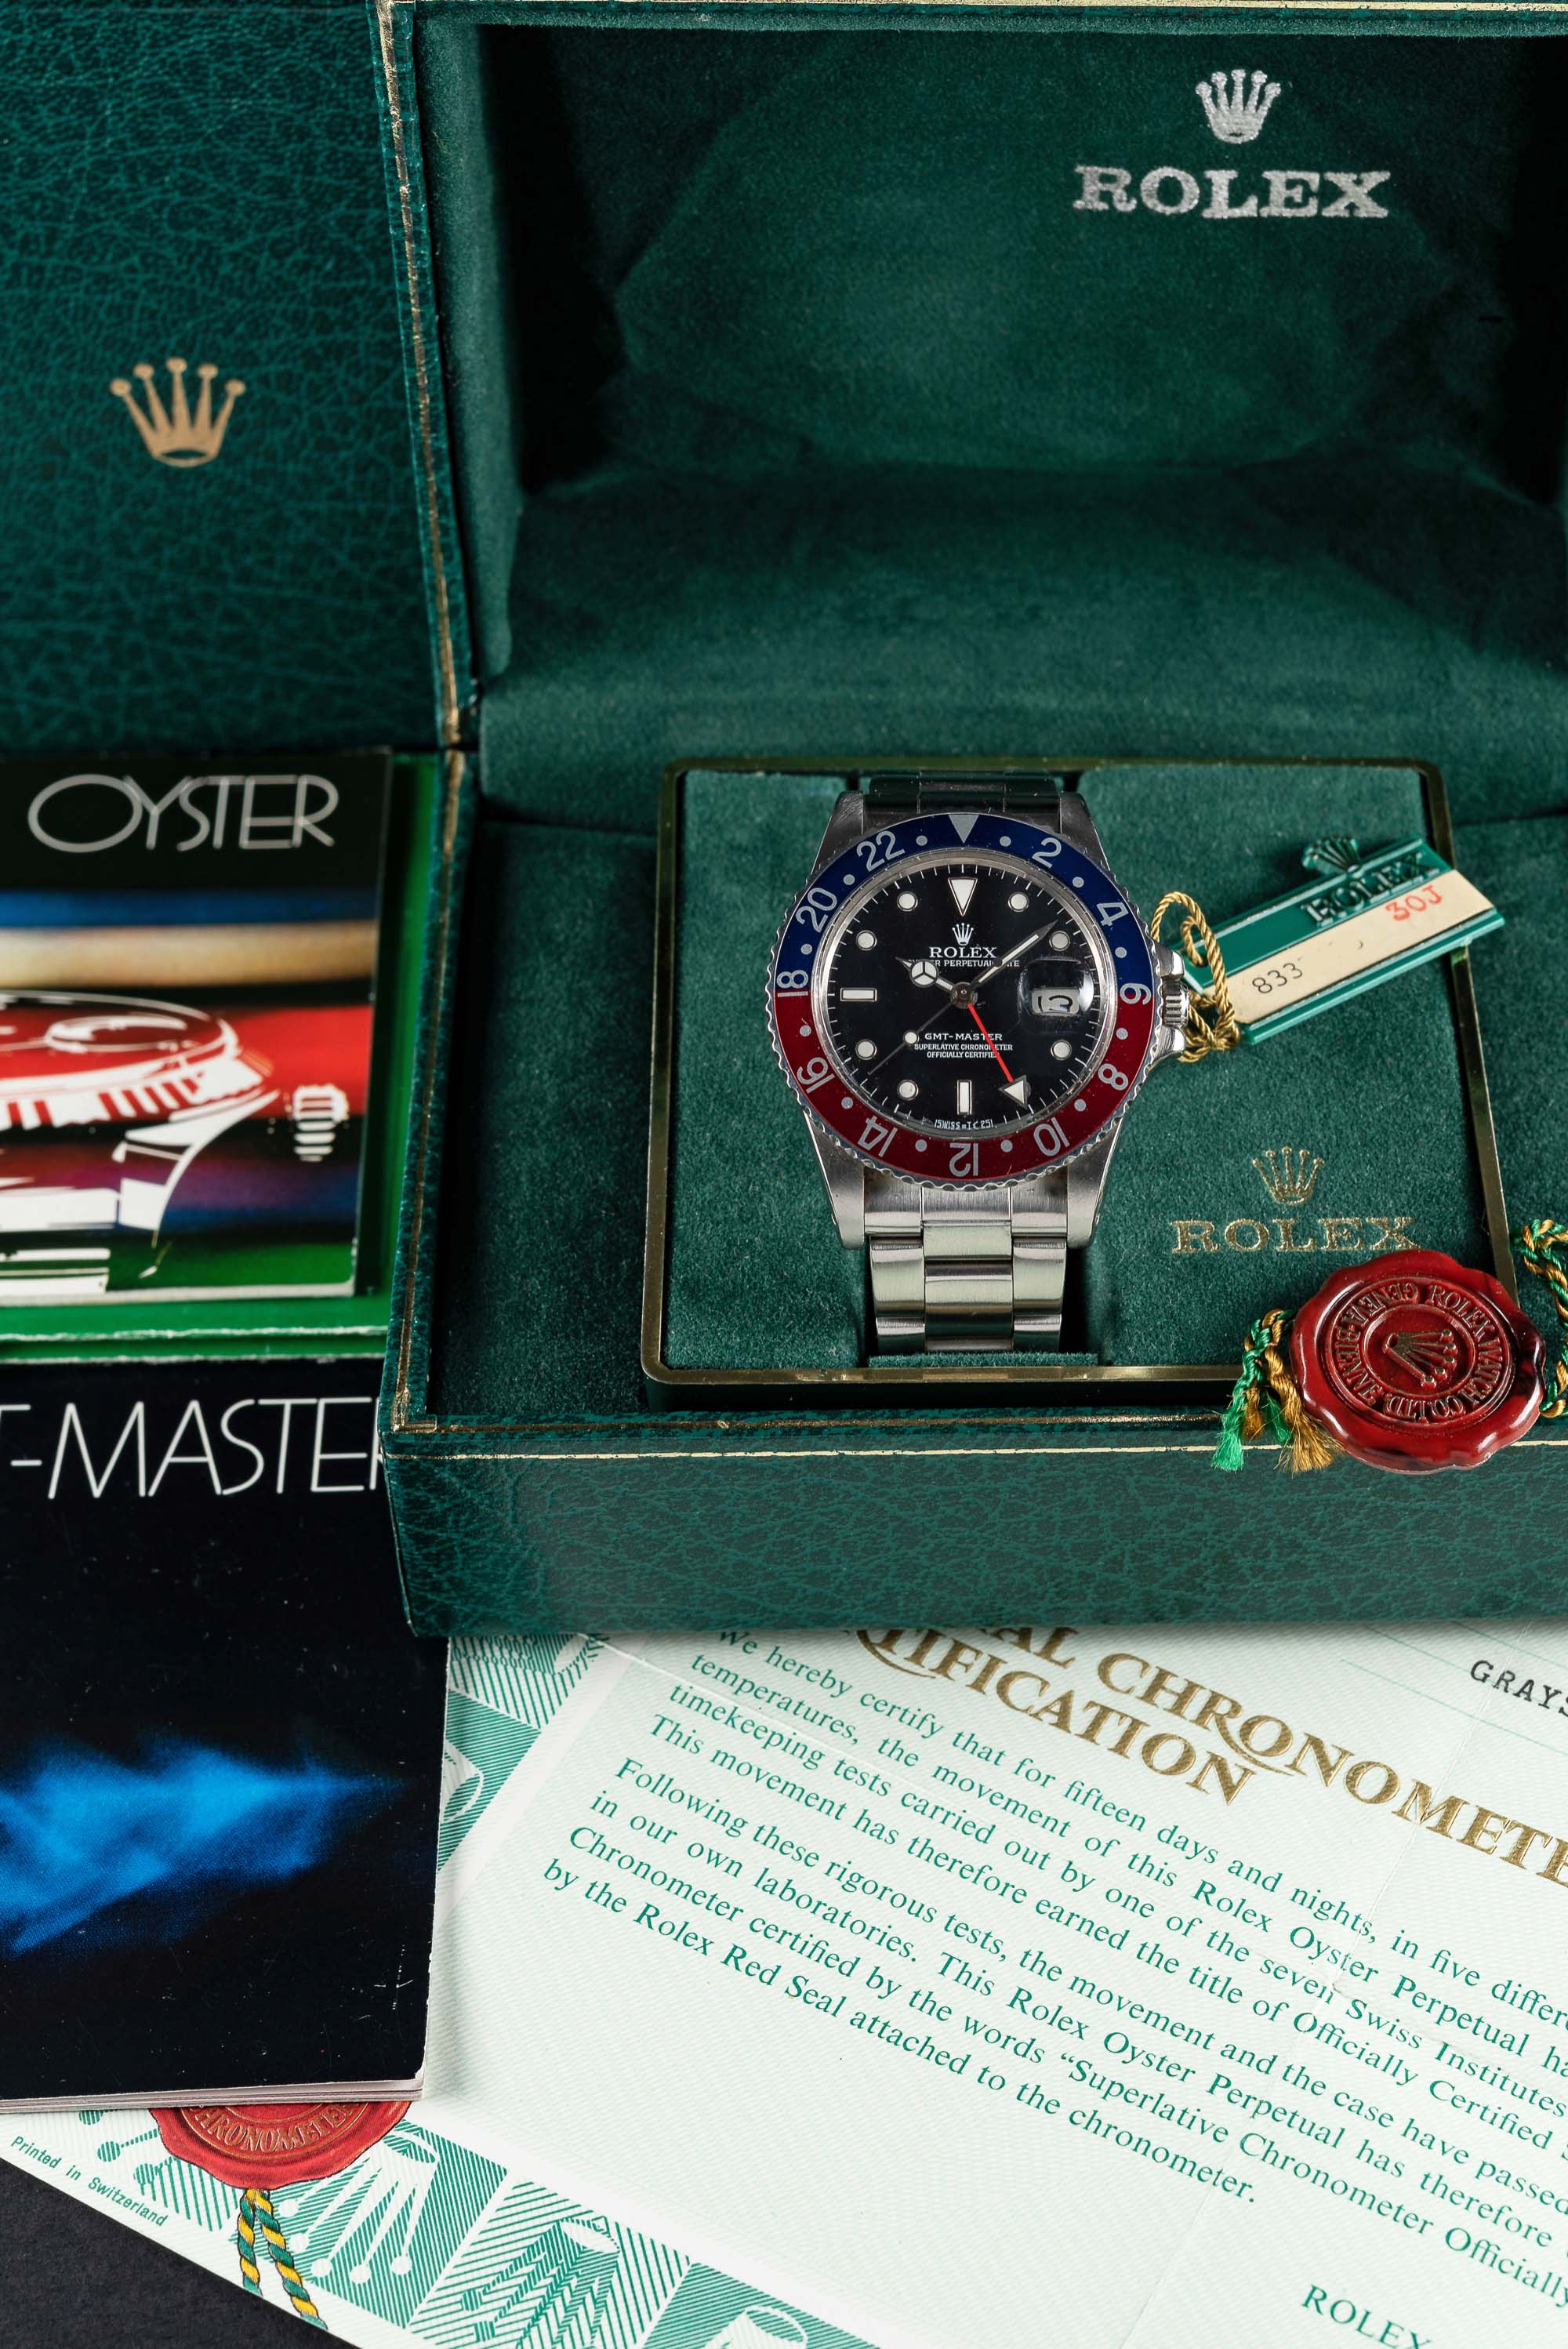 A RARE GENTLEMAN'S STAINLESS STEEL ROLEX OYSTER PERPETUAL DATE GMT MASTER "PEPSI" BRACELET WATCH - Image 2 of 3